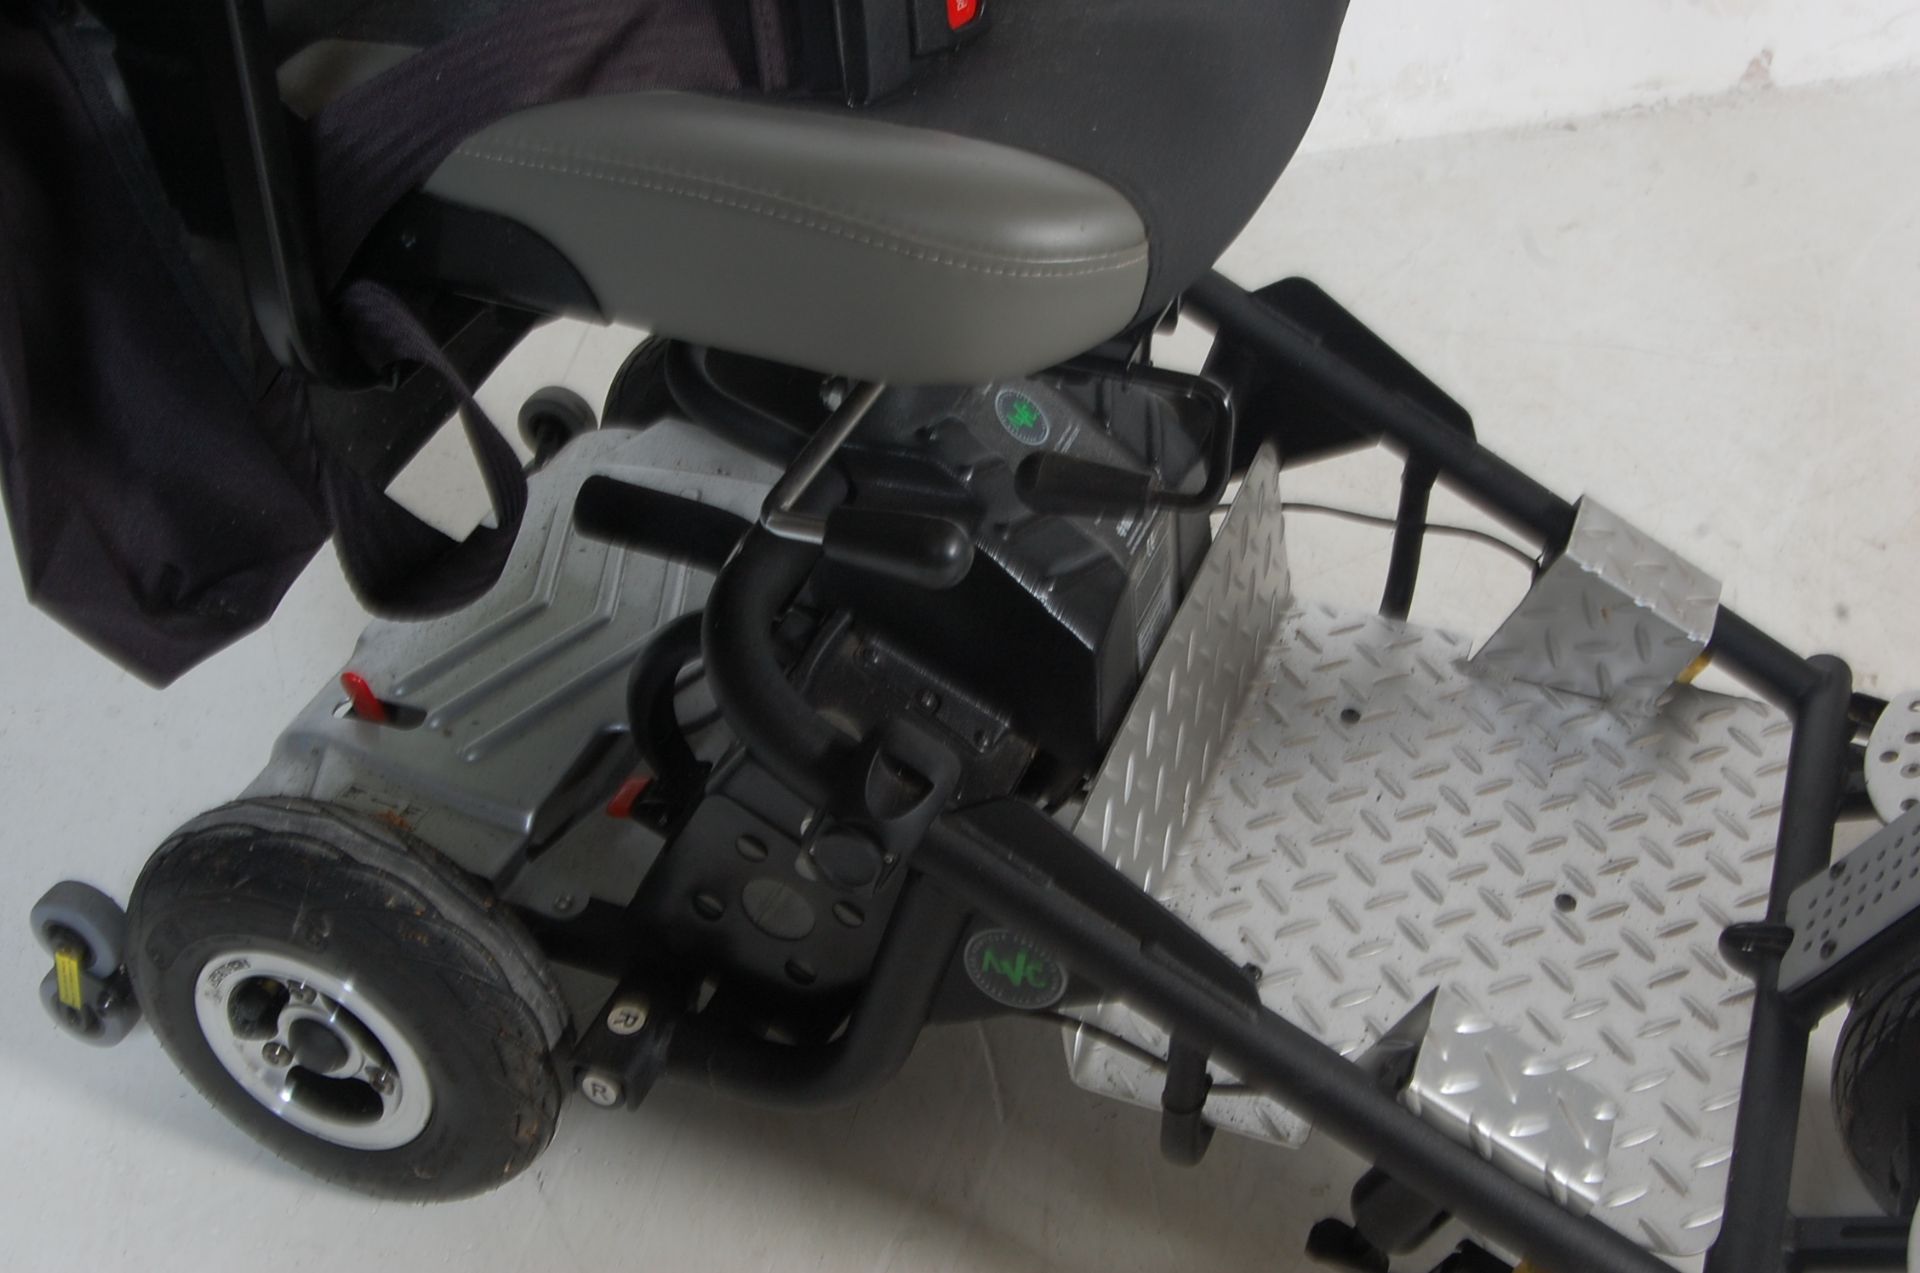 QUINGO AIR MOBILITY AID SCOOTER IN SILVER - Bild 8 aus 9